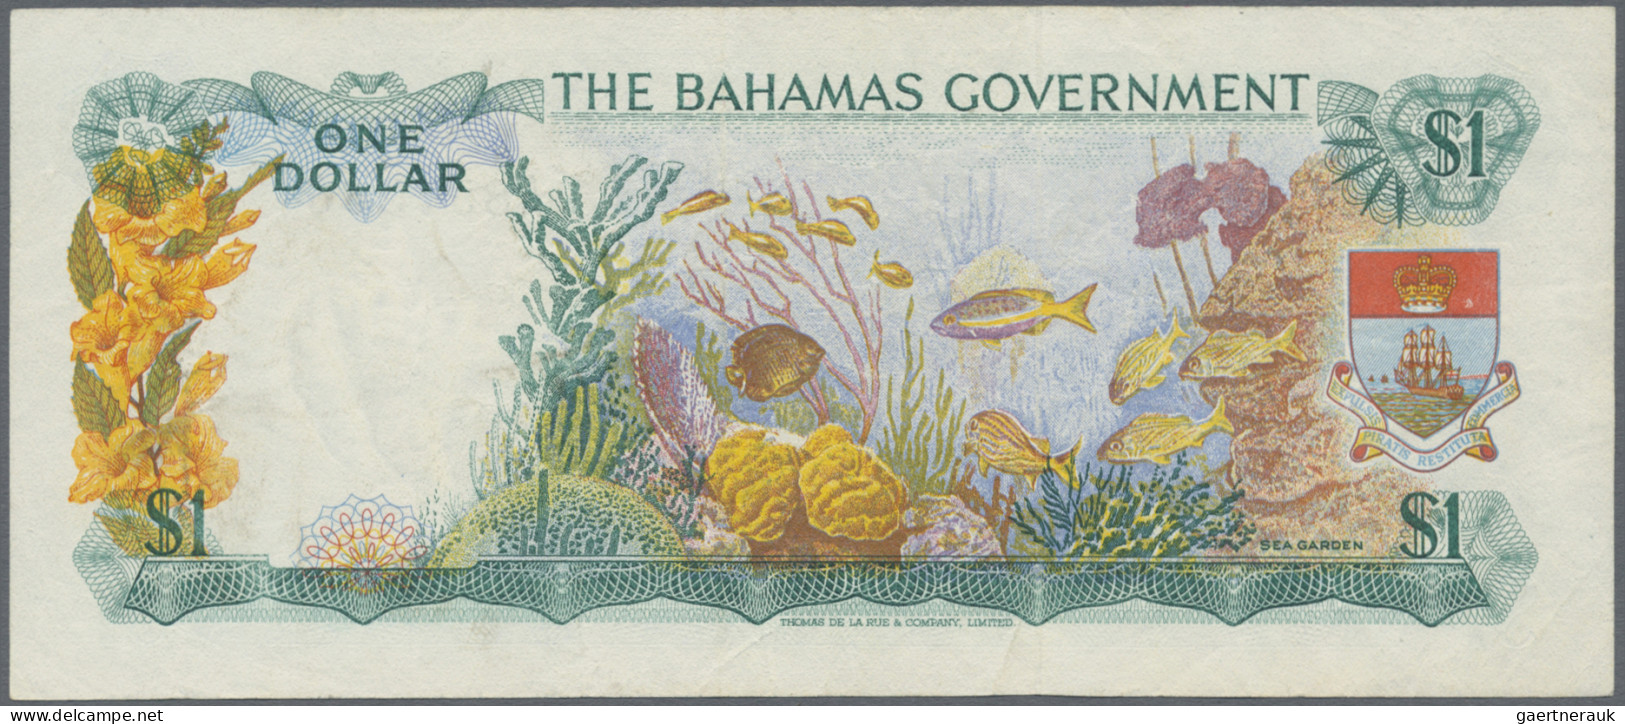 Bahamas: The Bahamas Government, L.1965 Series, Pair With 50 Cents And 1 Dollar, - Bahama's